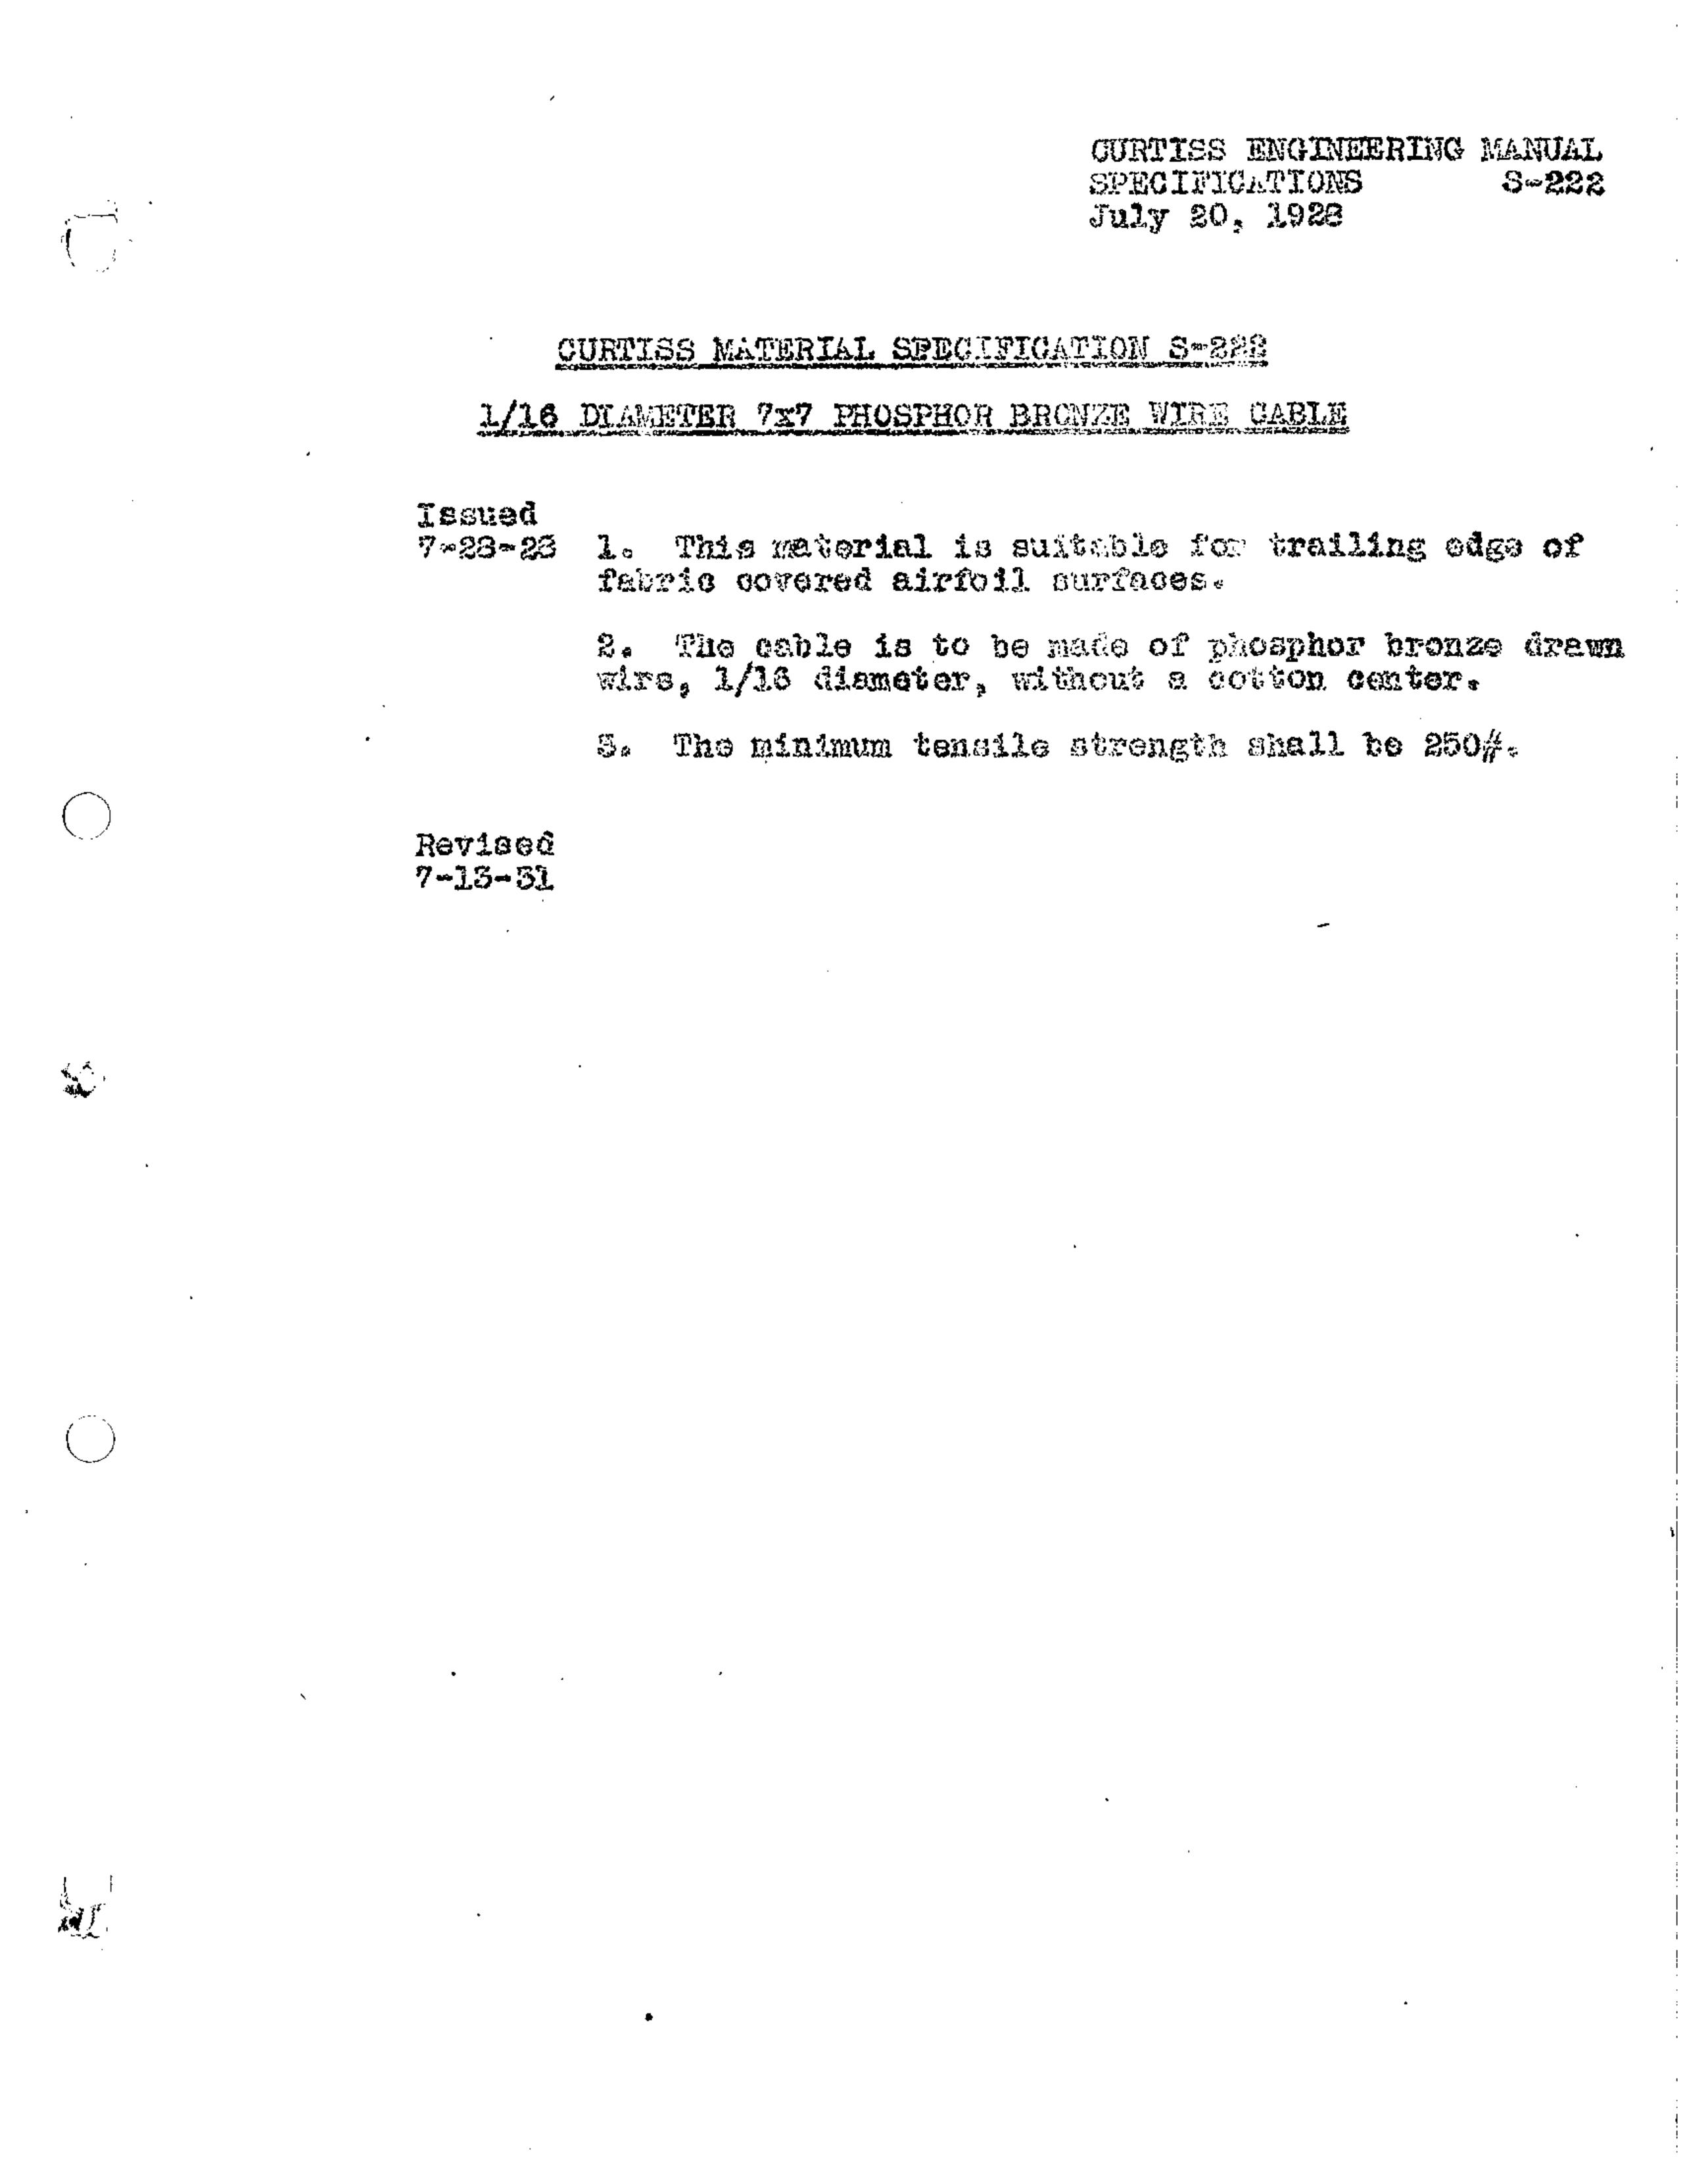 Sample page 2 from AirCorps Library document: Curtiss Engineering Manual - Specifications